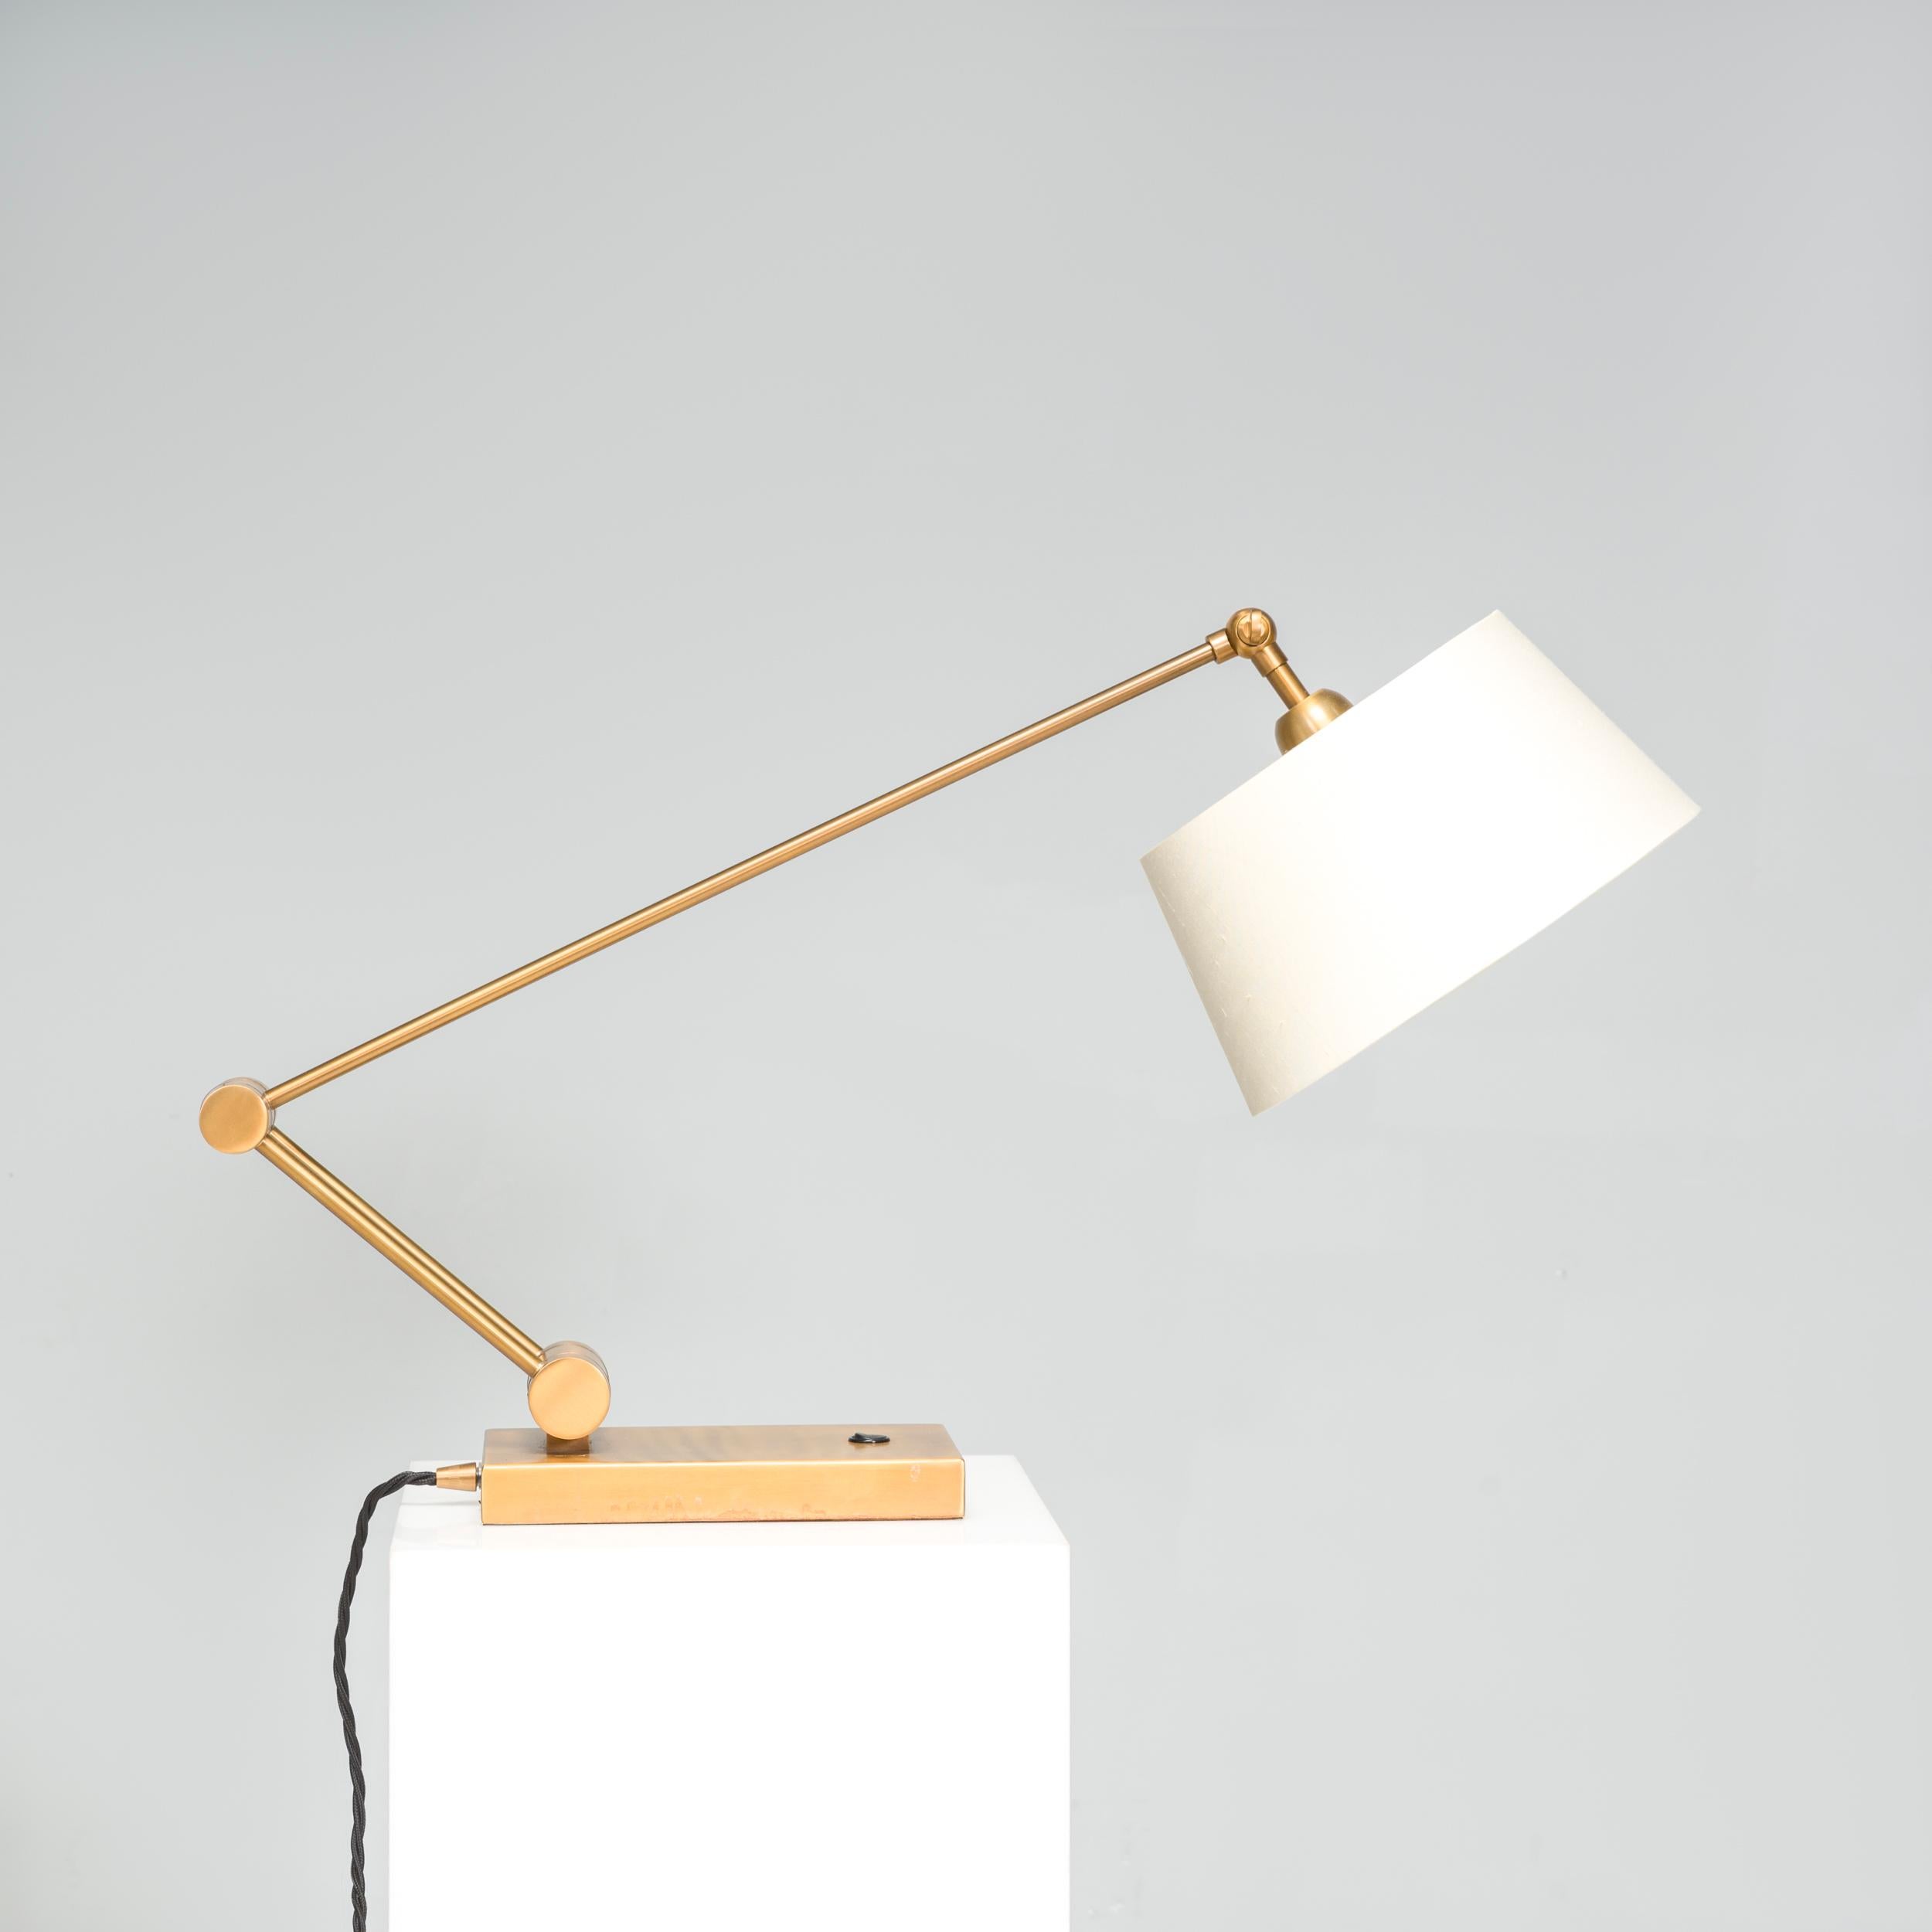 This brass desk lamp by Heathfield & Co has an impressive design that would elevate any living space or bedroom. The angular shape of its arm, punctuated by a rounded hinge, is counterbalanced by the rounded cream lampshade. The desk lamp would